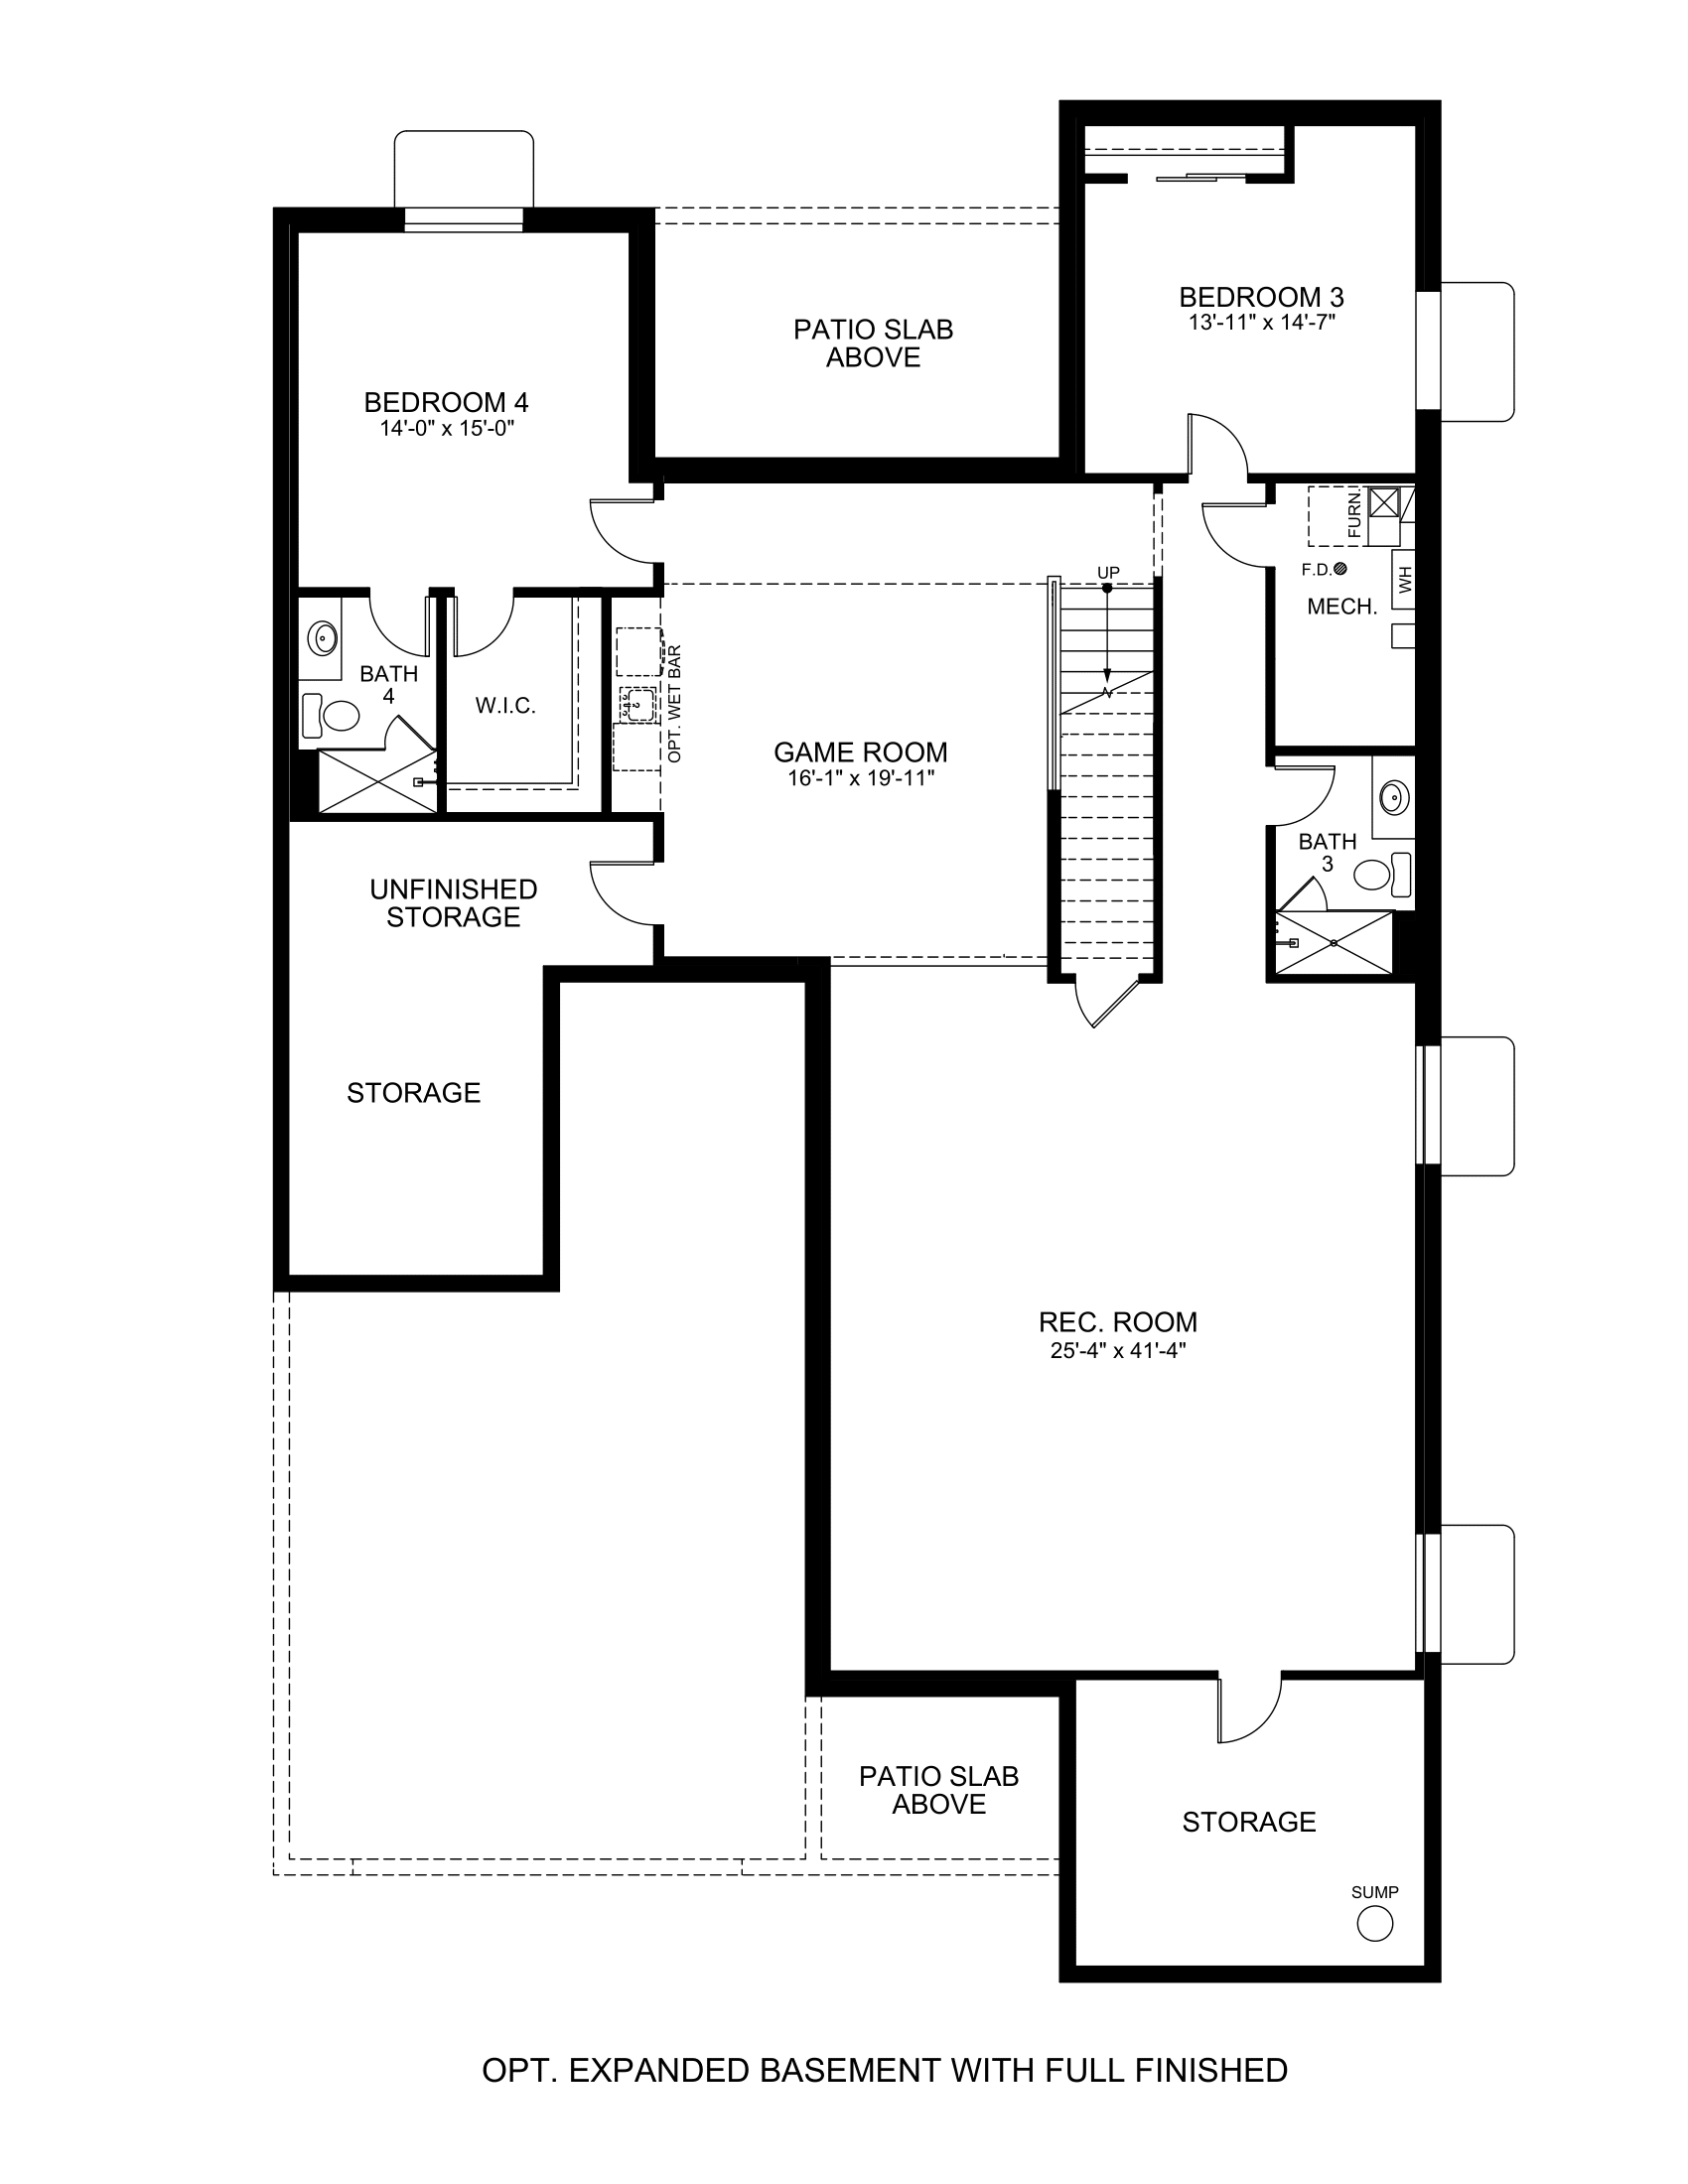 Optional Expanded Basement with Full Finished